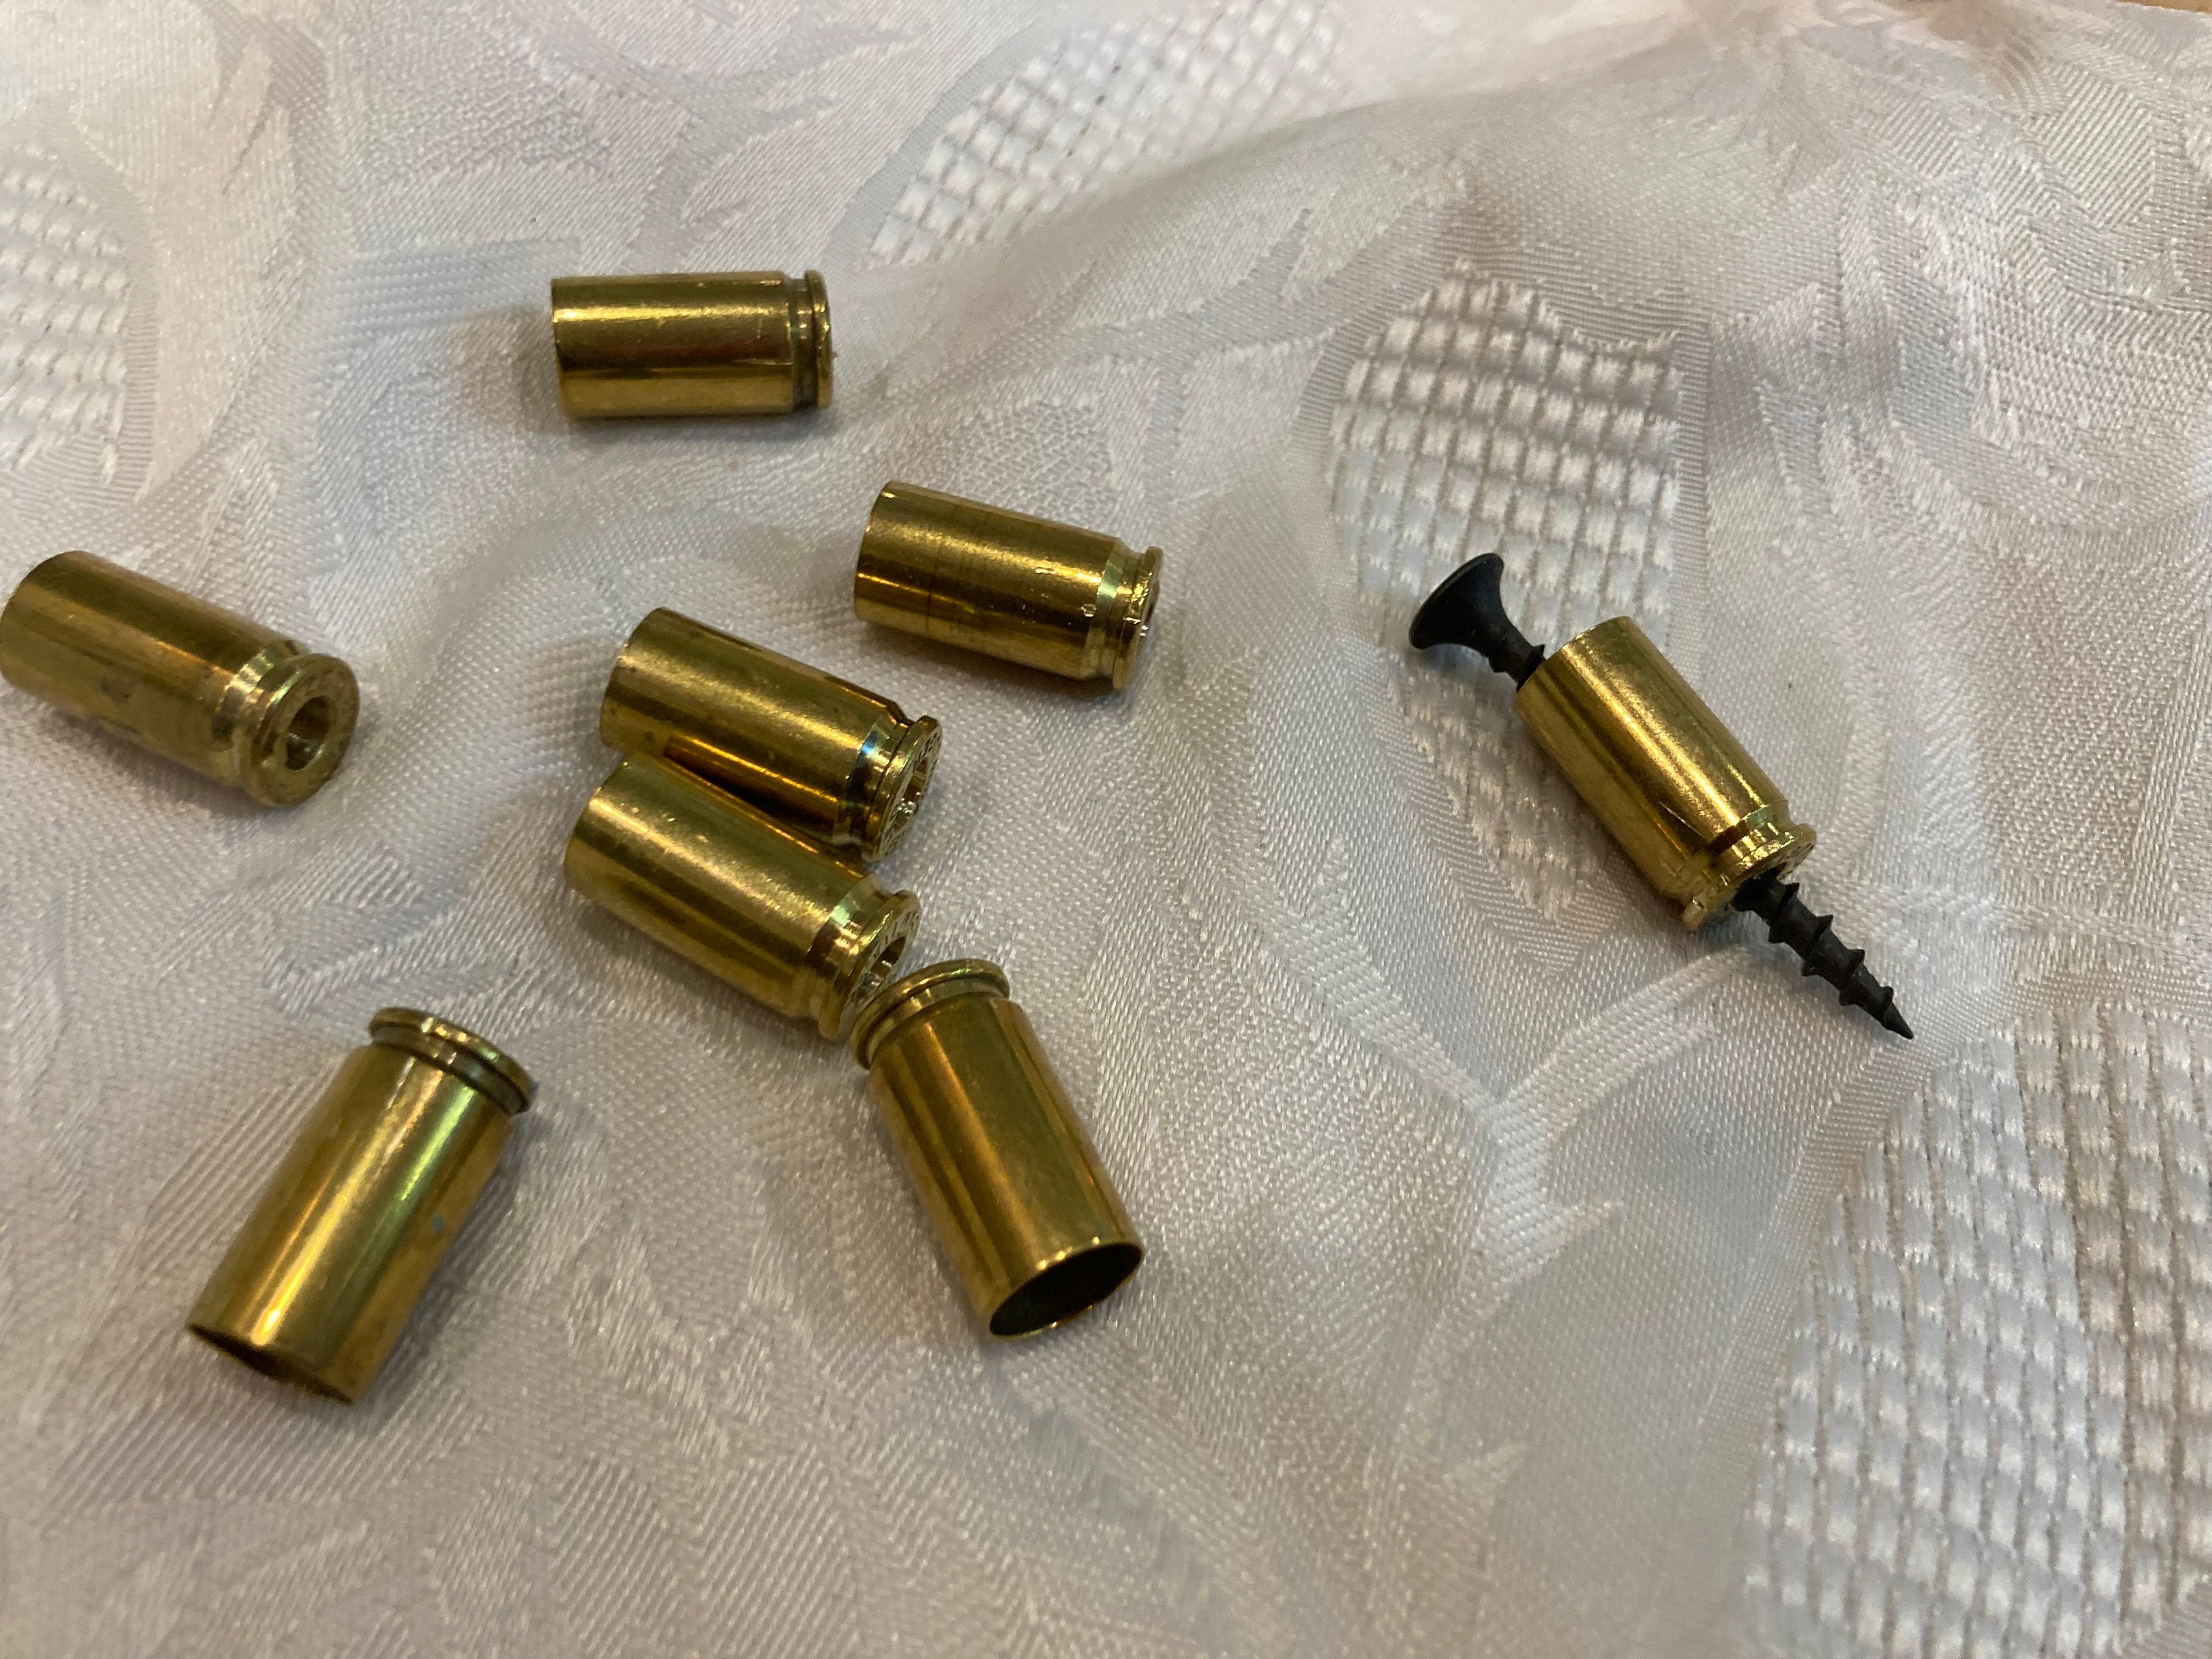 223 5.56 Polished Brass Shells Empty Spent Bullet Casings Used Cleaned –